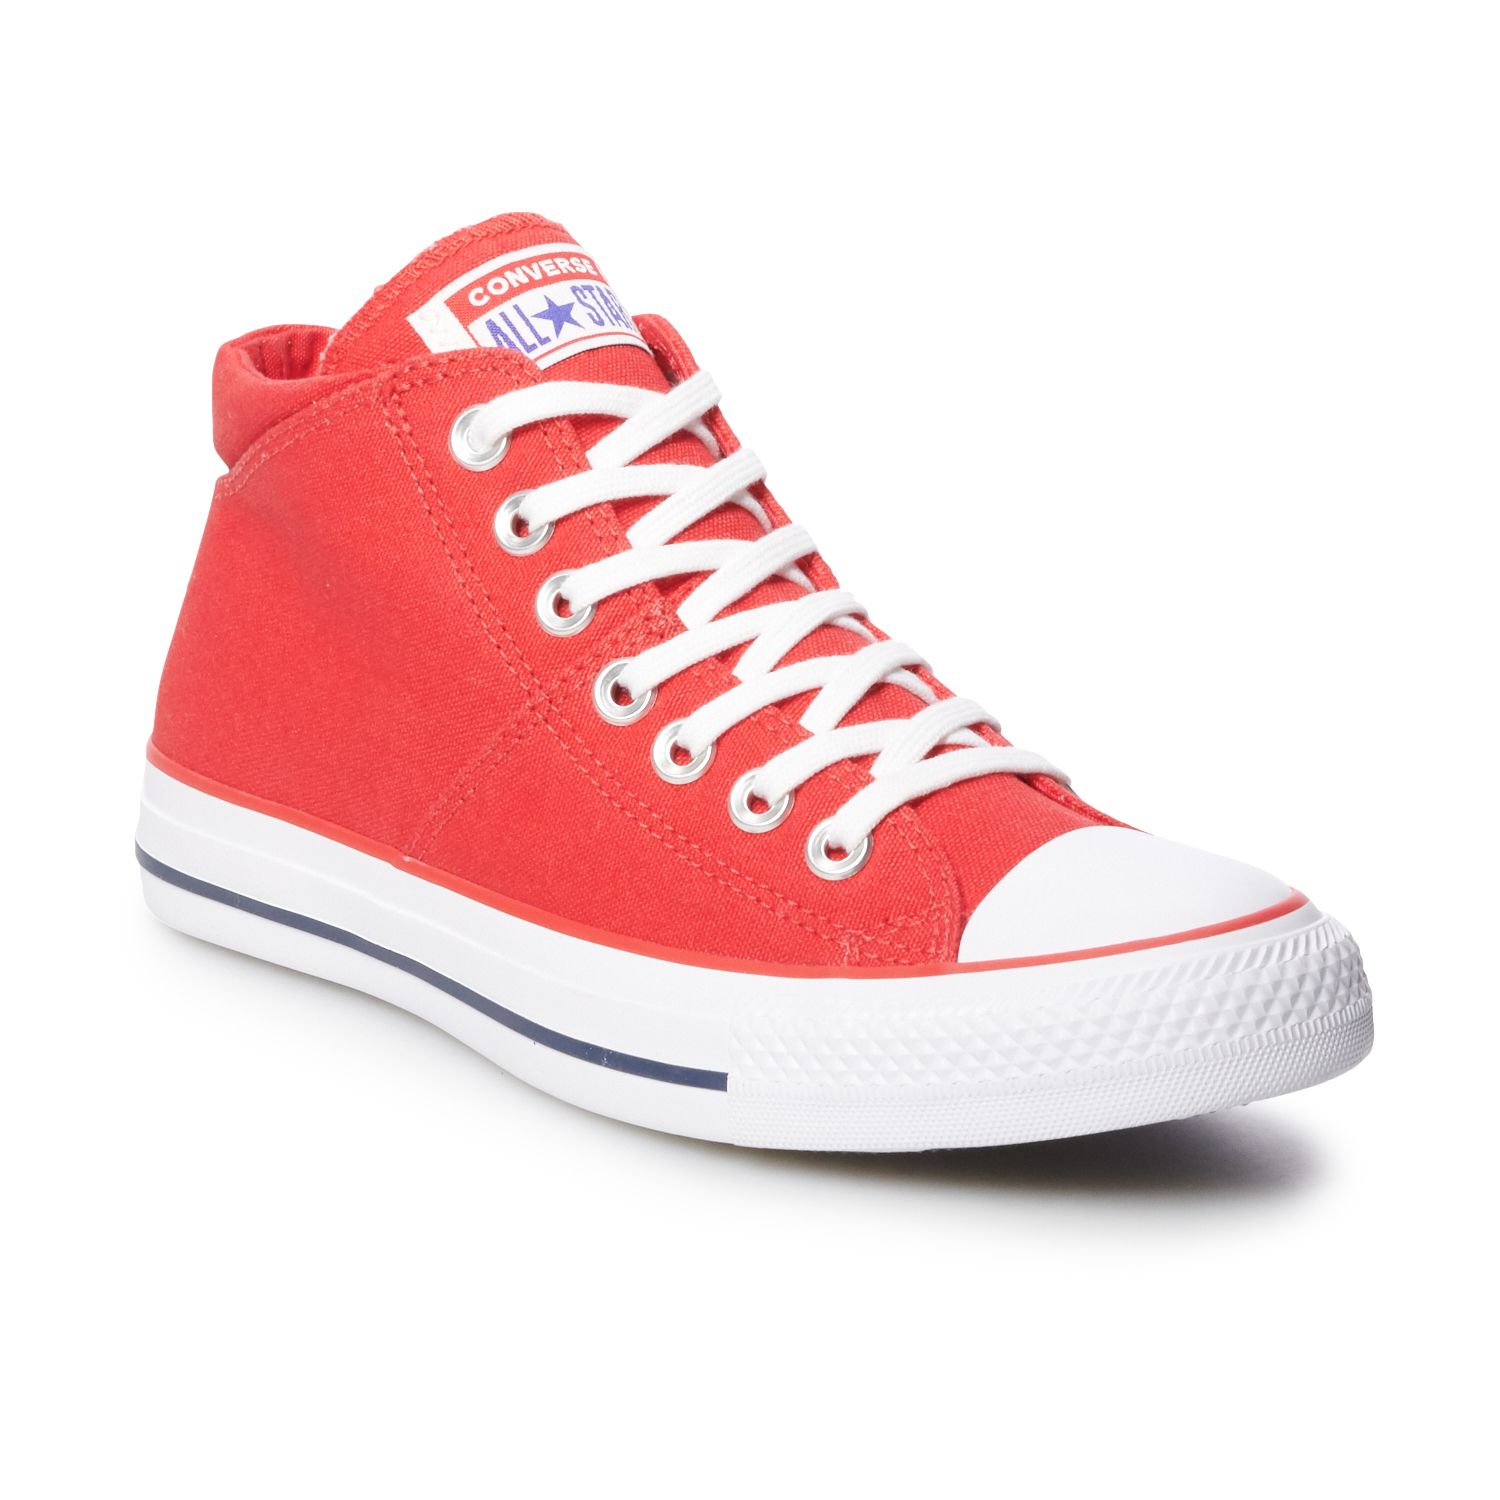 converse all red high tops